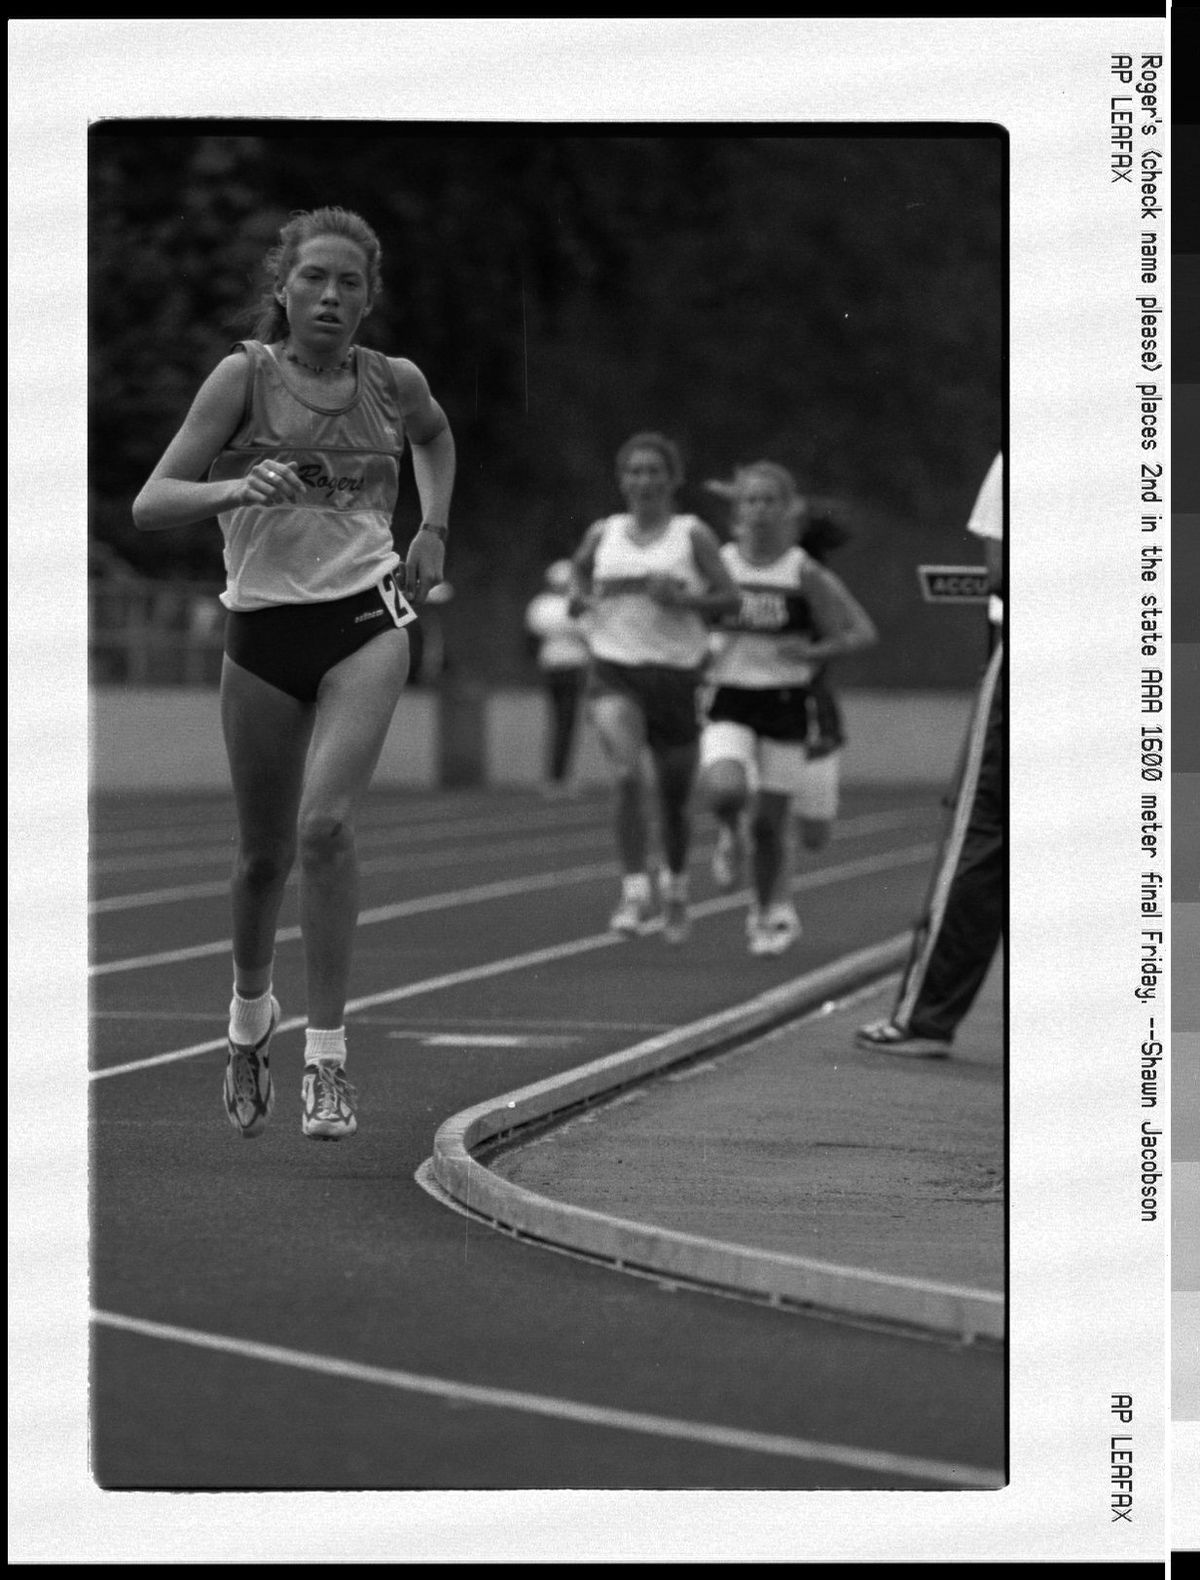 Then: In 1993, Rogers junior Jessica Fry finished second in state 3,200 meters. (File)